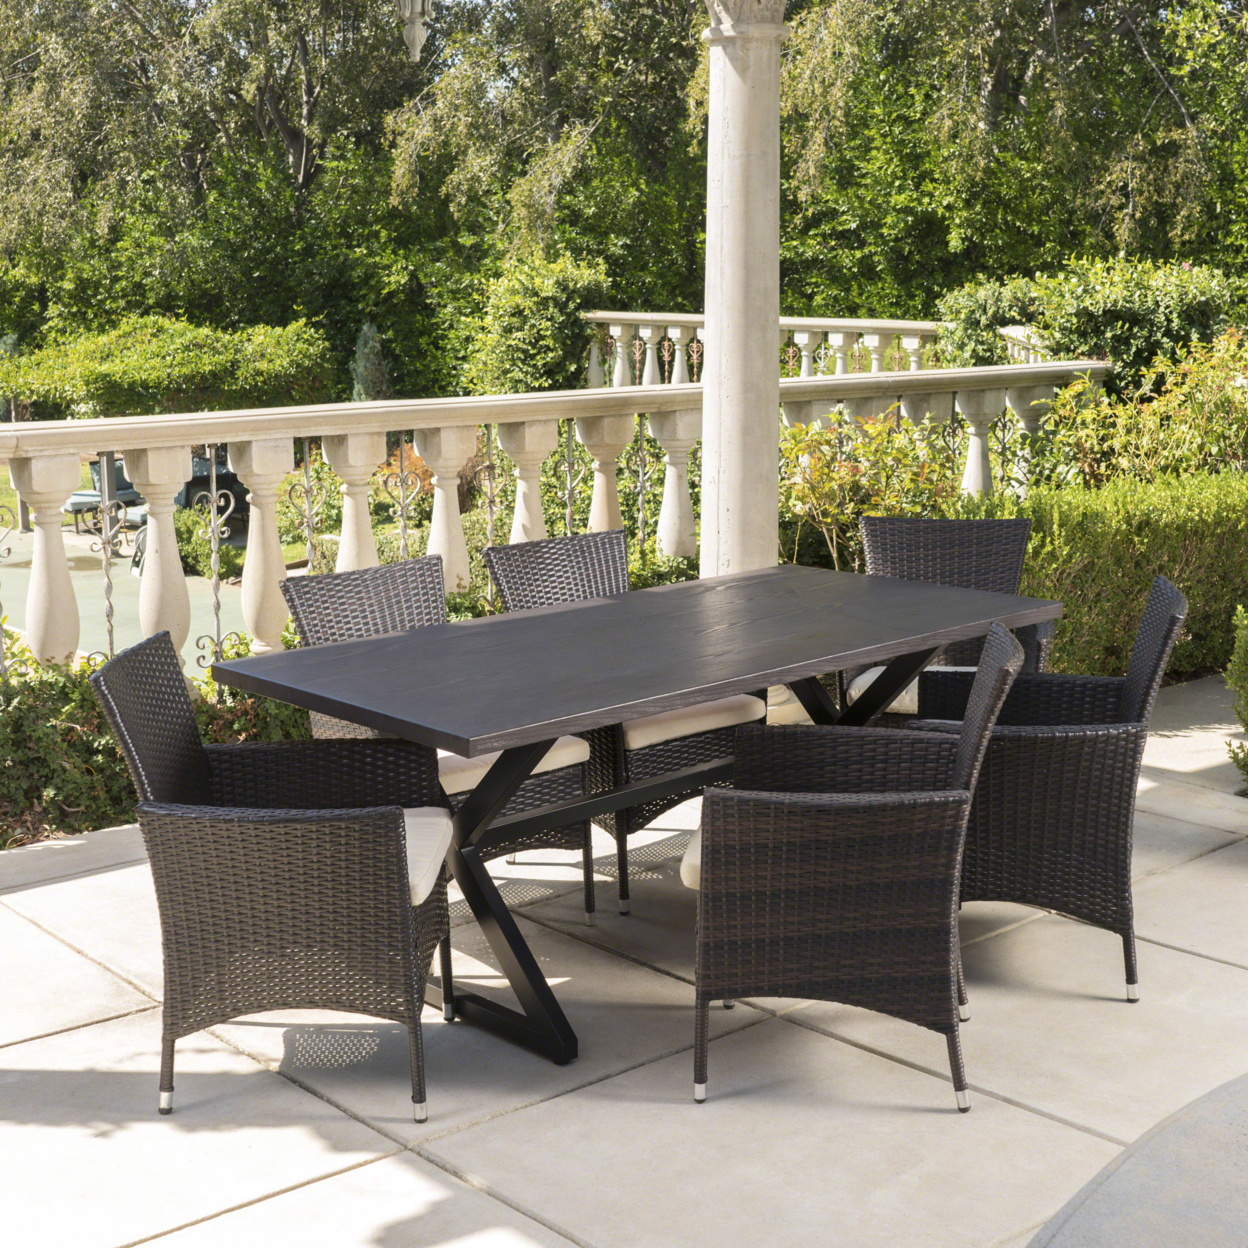 Dionlynn Outdoor 7 Piece Aluminum Dining Set with Wicker Dining Chairs - Brown/Multi-brown